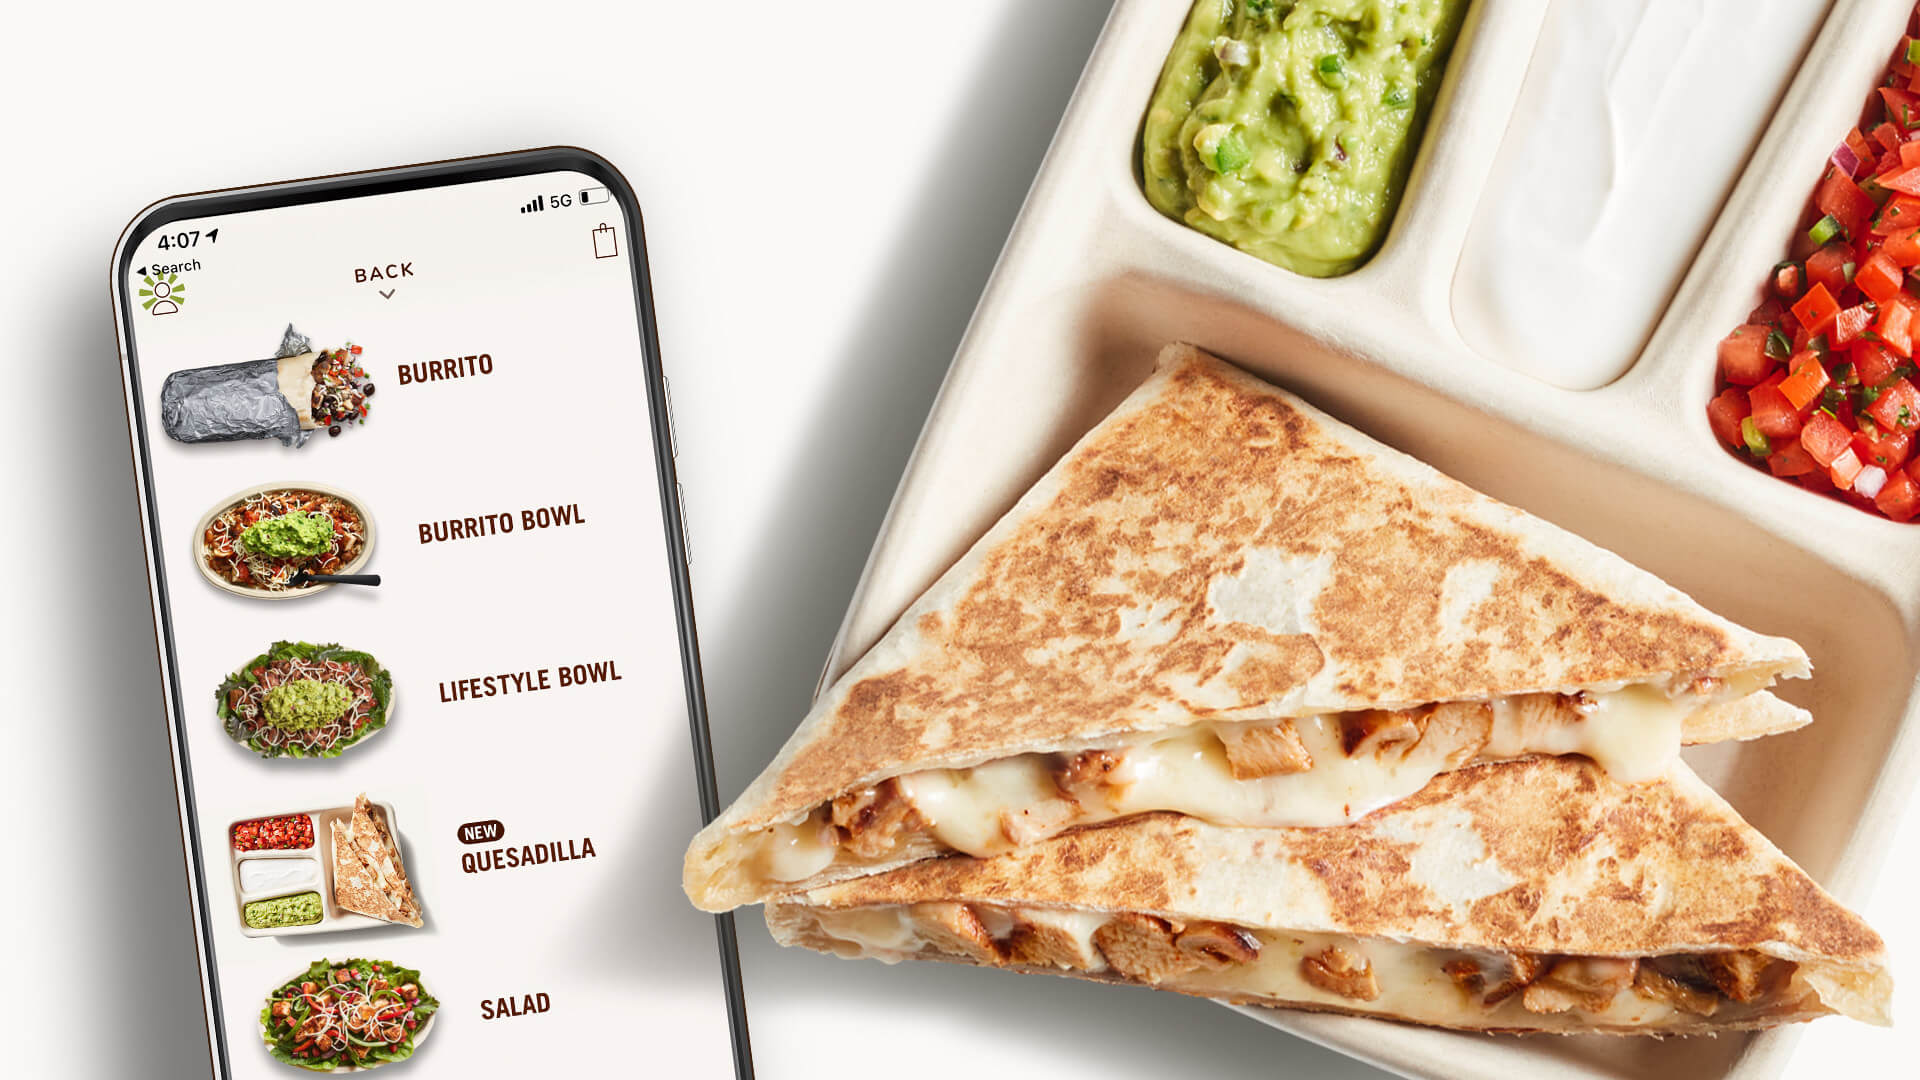 Examples of restaurant post-COVID strategies, Chipotle's new Quesadilla alongside a mock-up of their mobile app